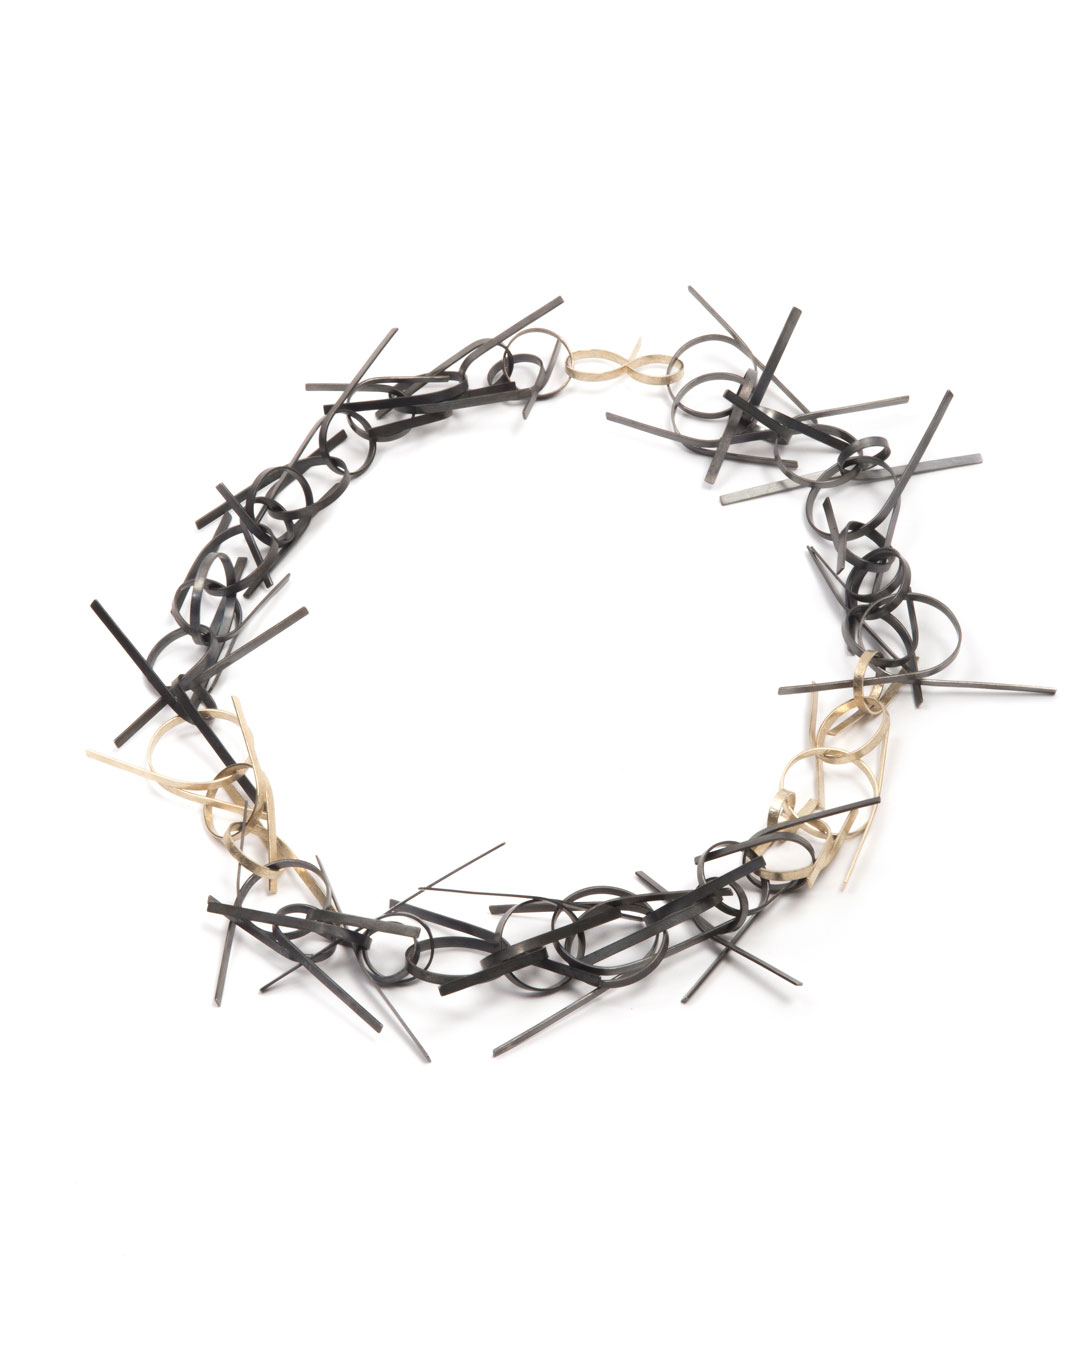 Karola Torkos, Tangled, 2019, necklace; recycled gold, recycled and patinated silver, 235 x 280 x 20 mm, €3400